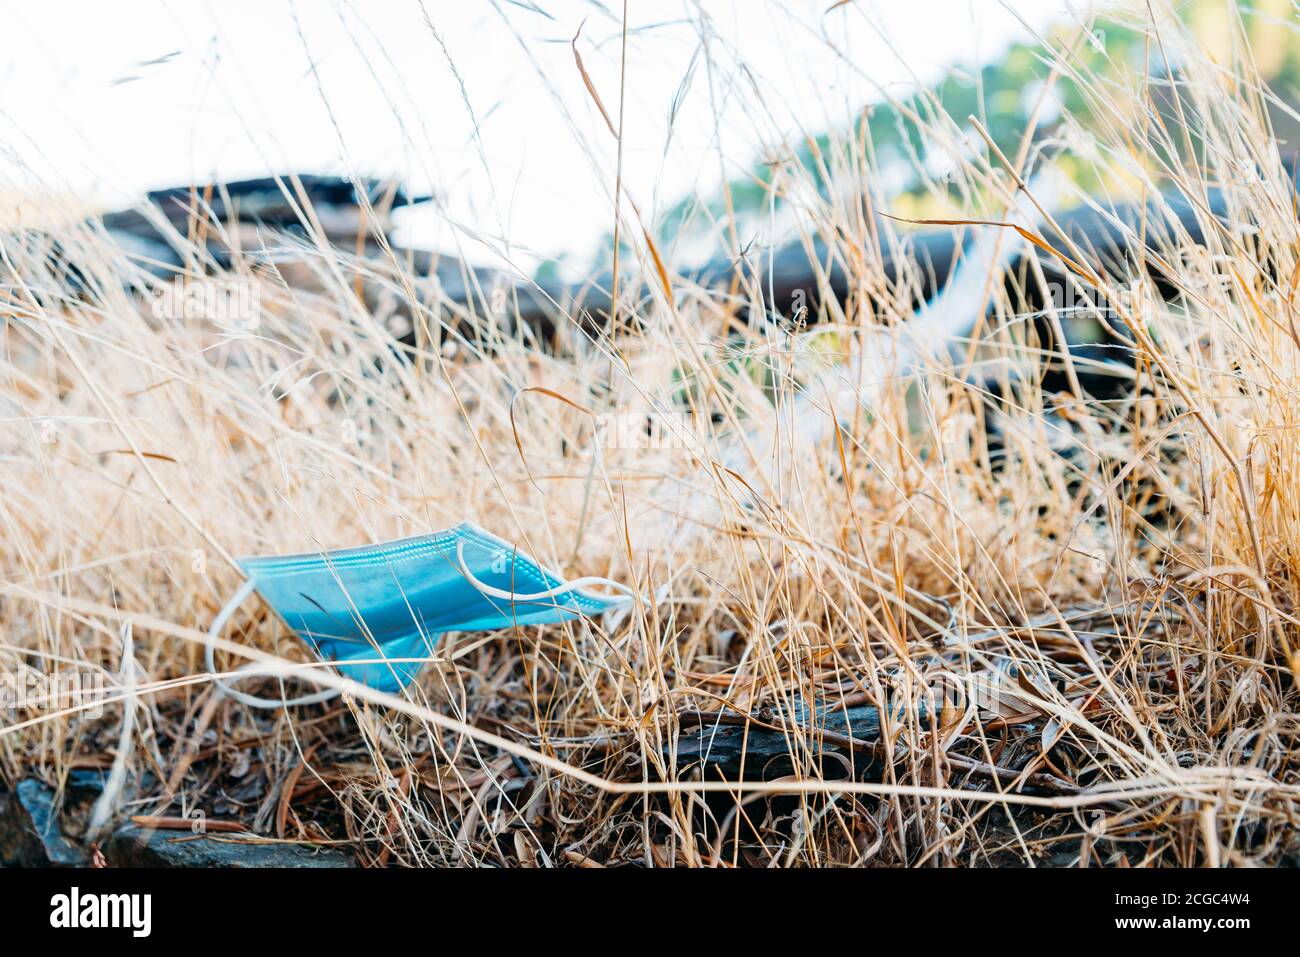 A discarded face mask lying on the ground. Stock Photo